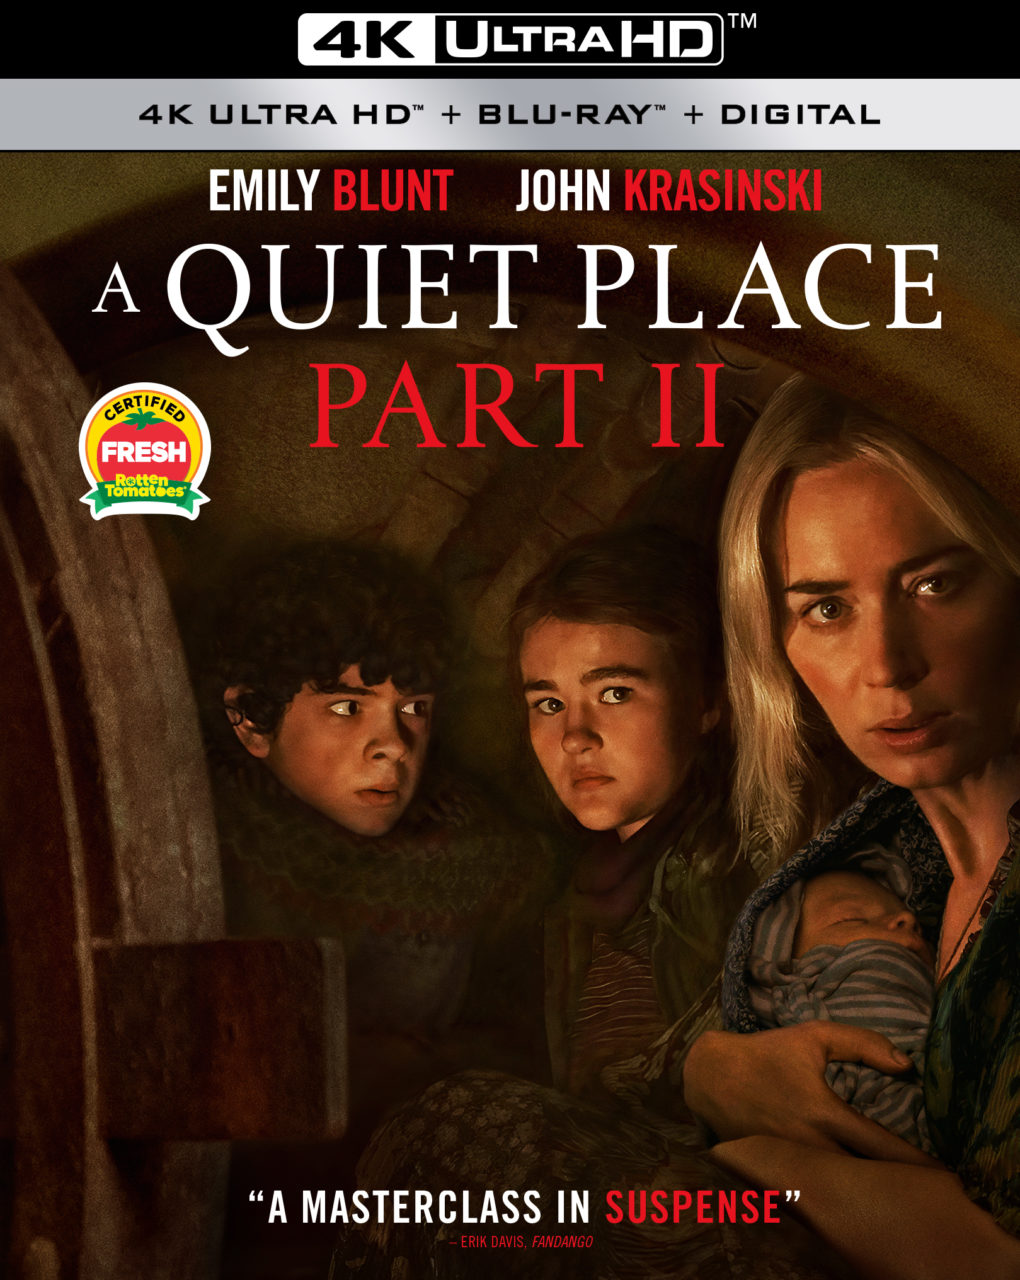 A Quiet Place Part II 4K Ultra HD Combo Pack cover (Paramount Home Entertainment)